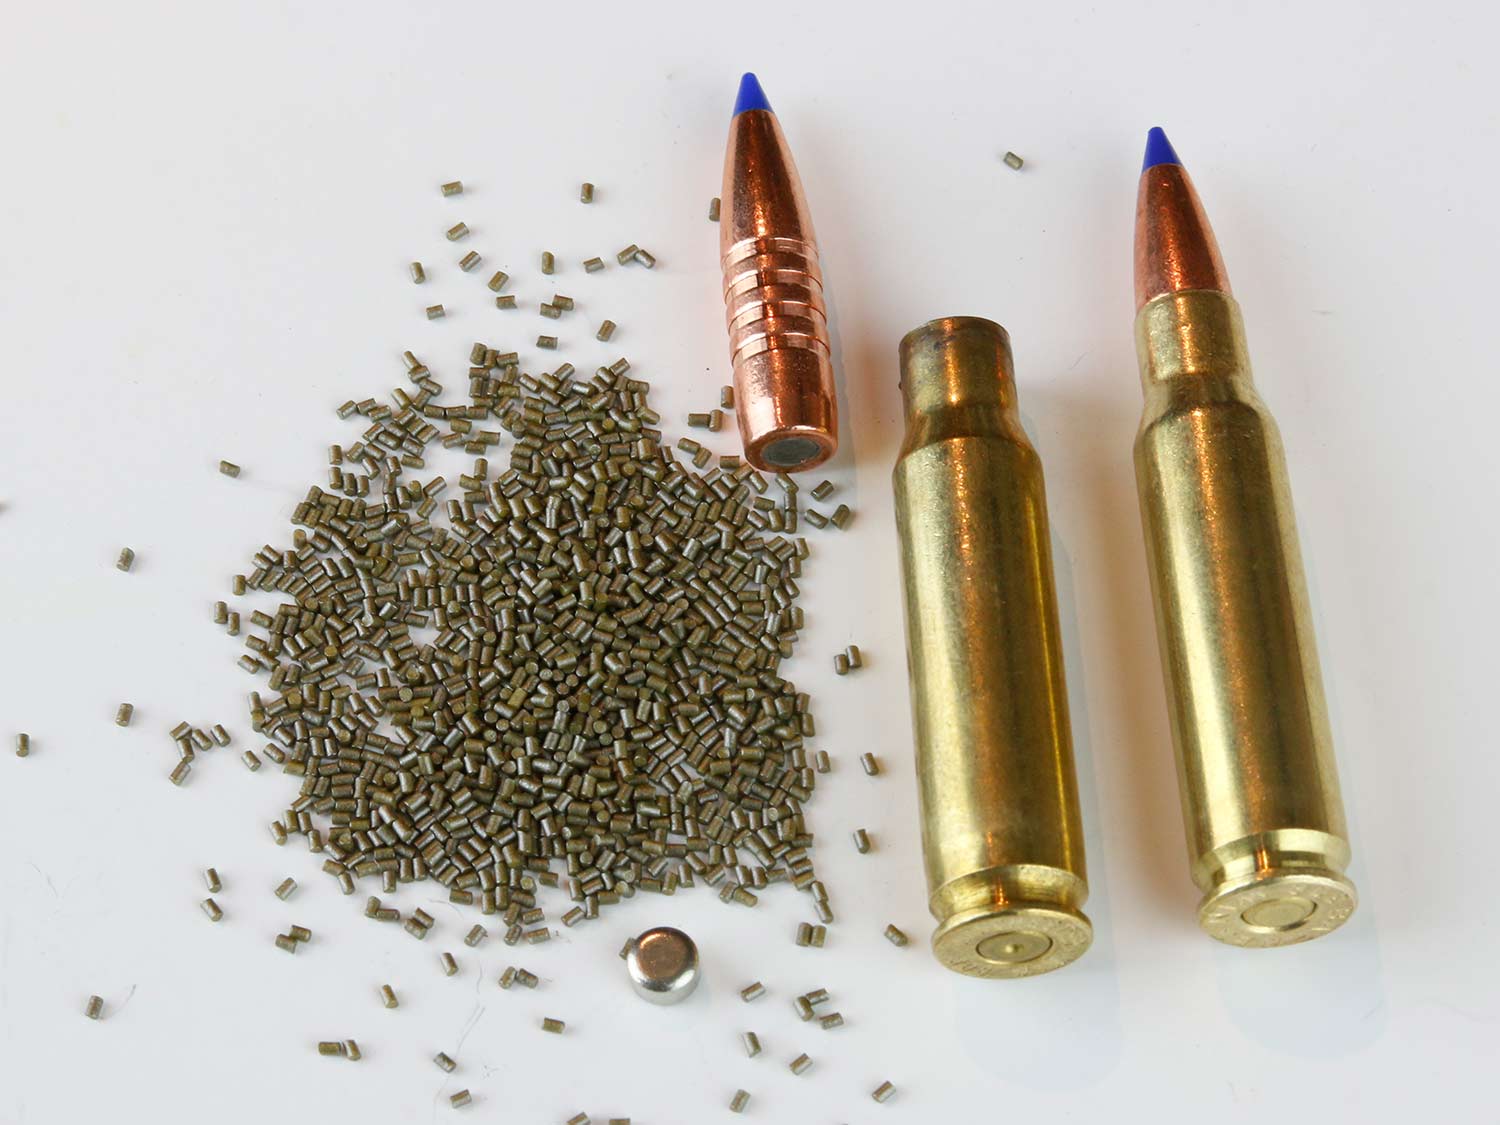 6.5 Creedmoor Ammunition and Powders (what's new?) - Rifles and Recipes